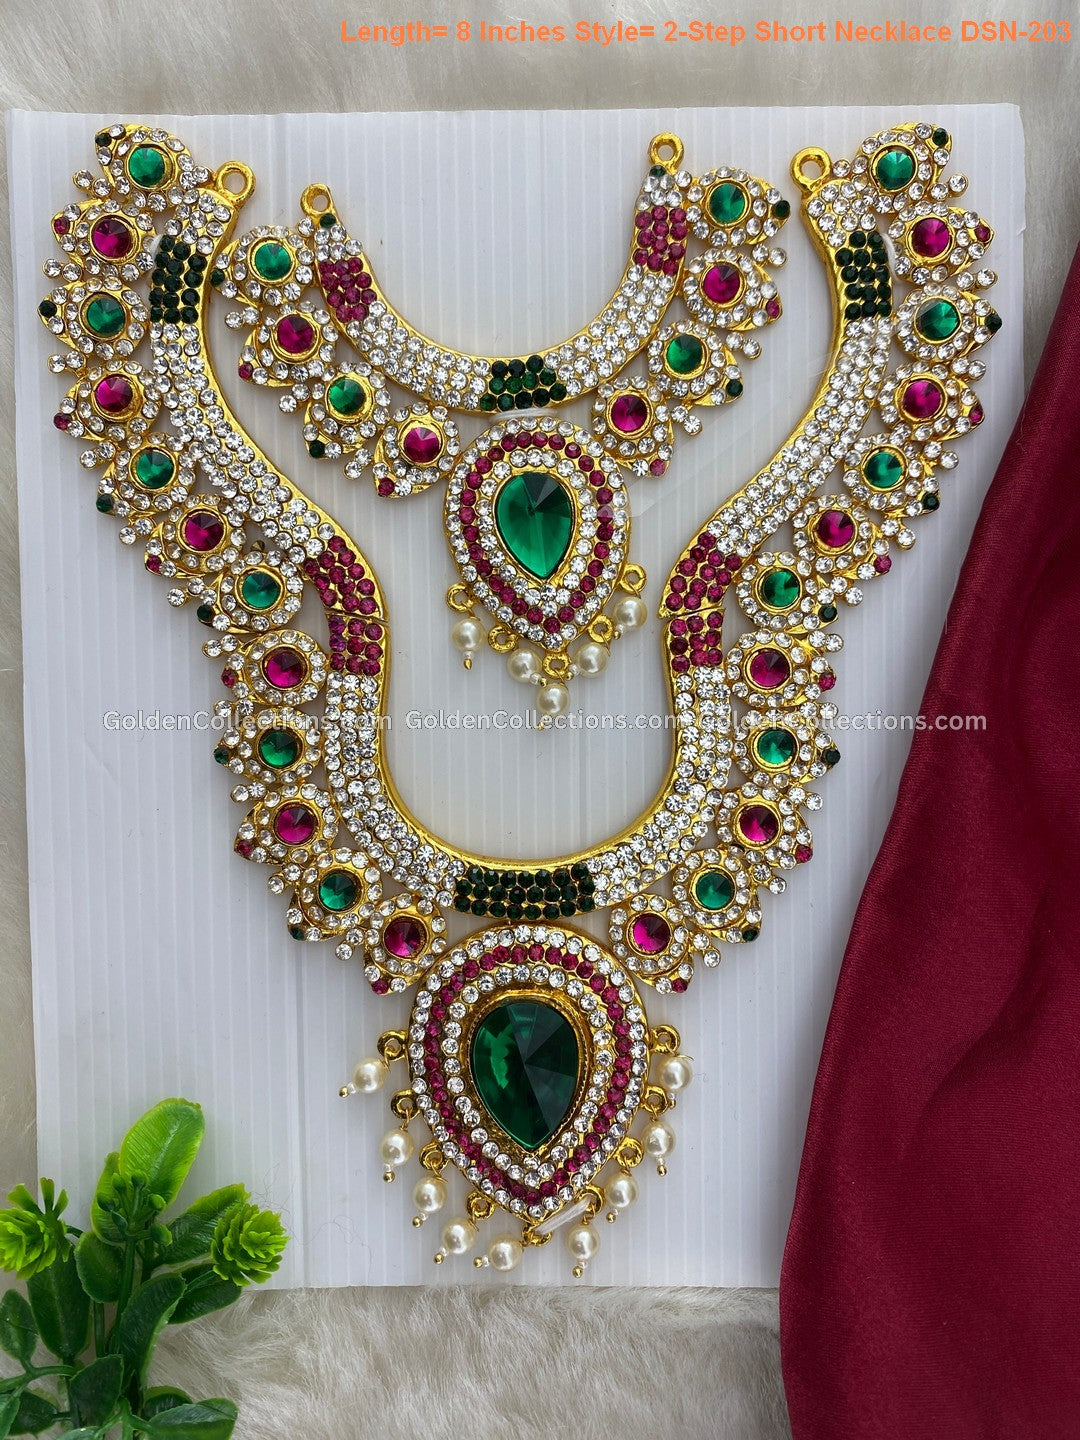 Temple Deity Necklace - Traditional God Jewellery Set - DSN-203